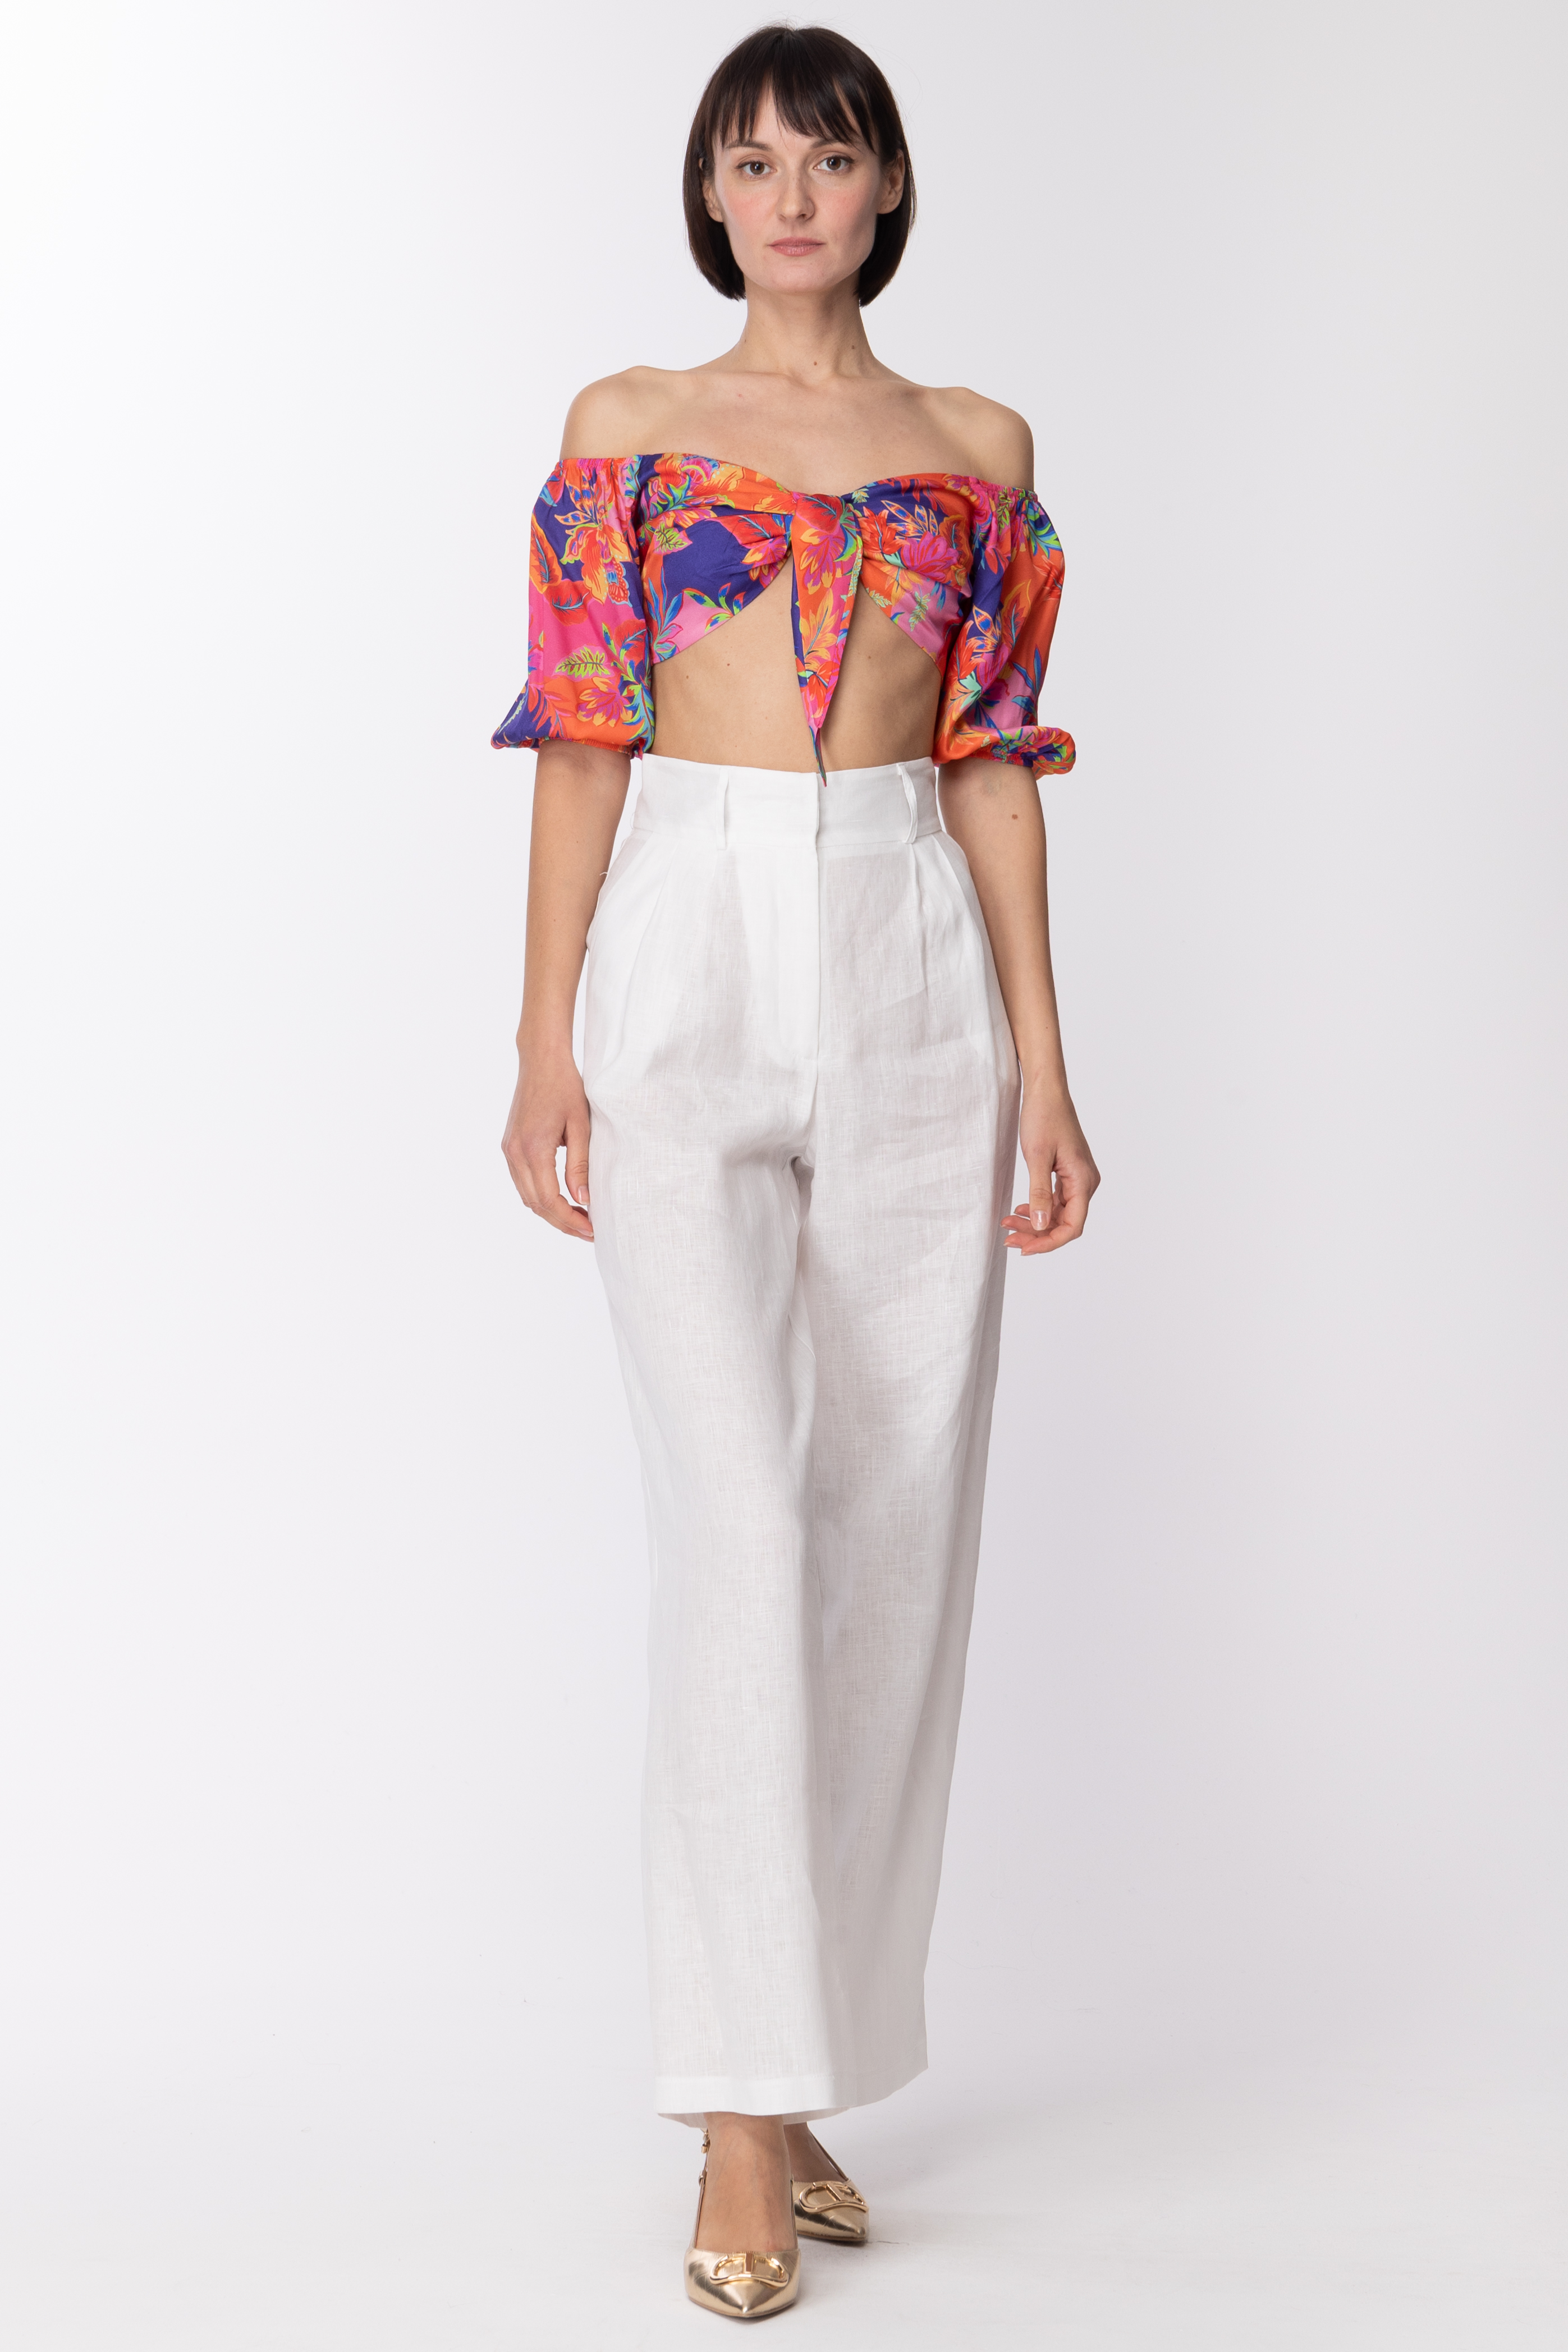 Preview: Dramèe Crop top with bow and tropical print STAMPA TROPICAL